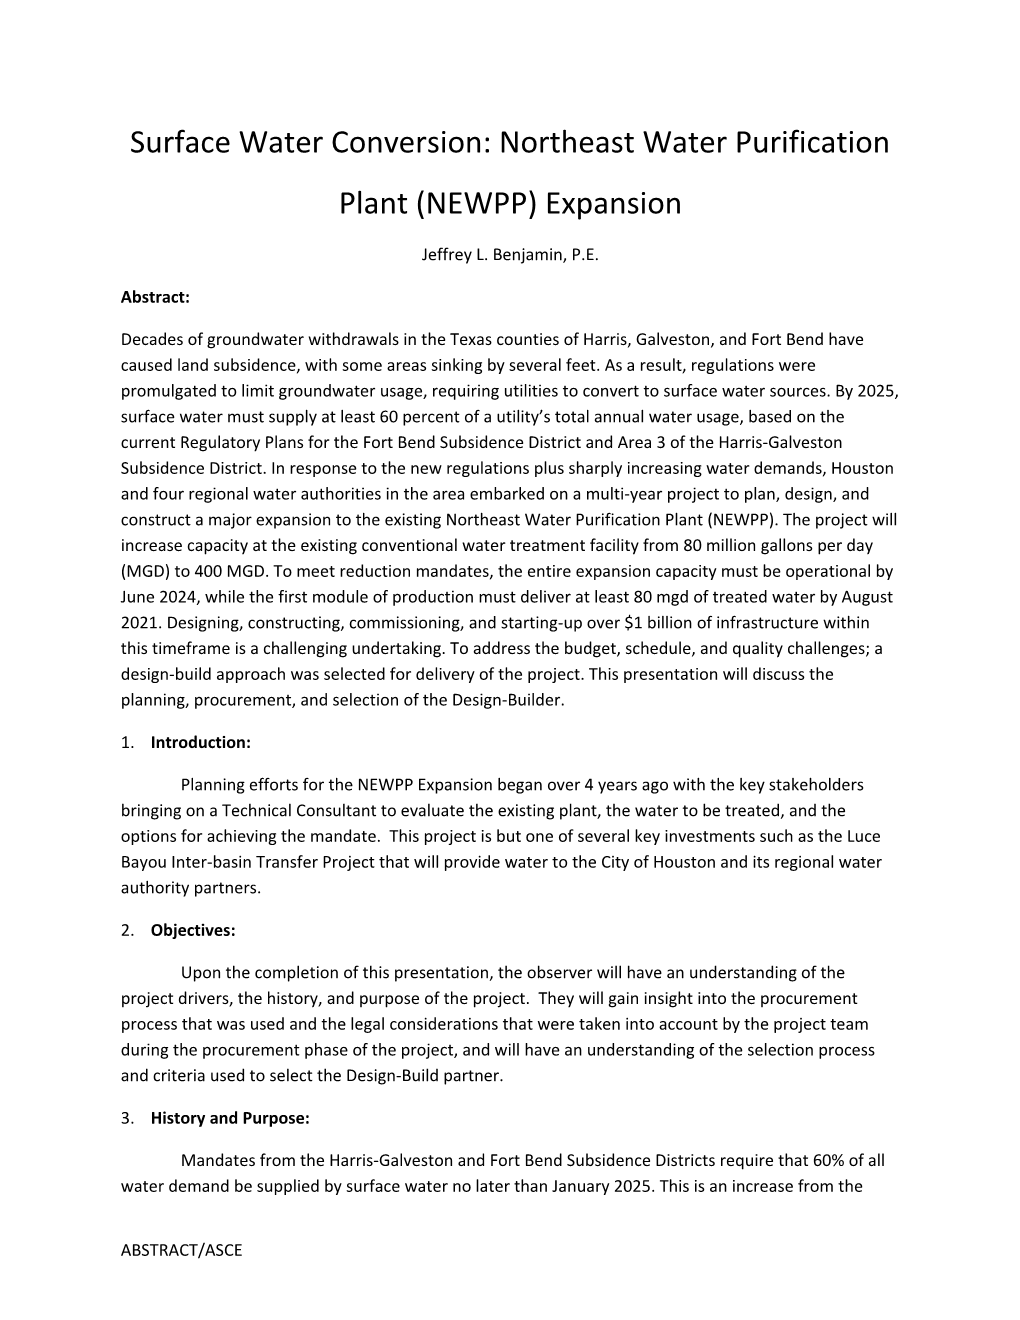 CIGMAT Abstract - Surface Water Conversion: Northeast Water Purification Plant Expansion